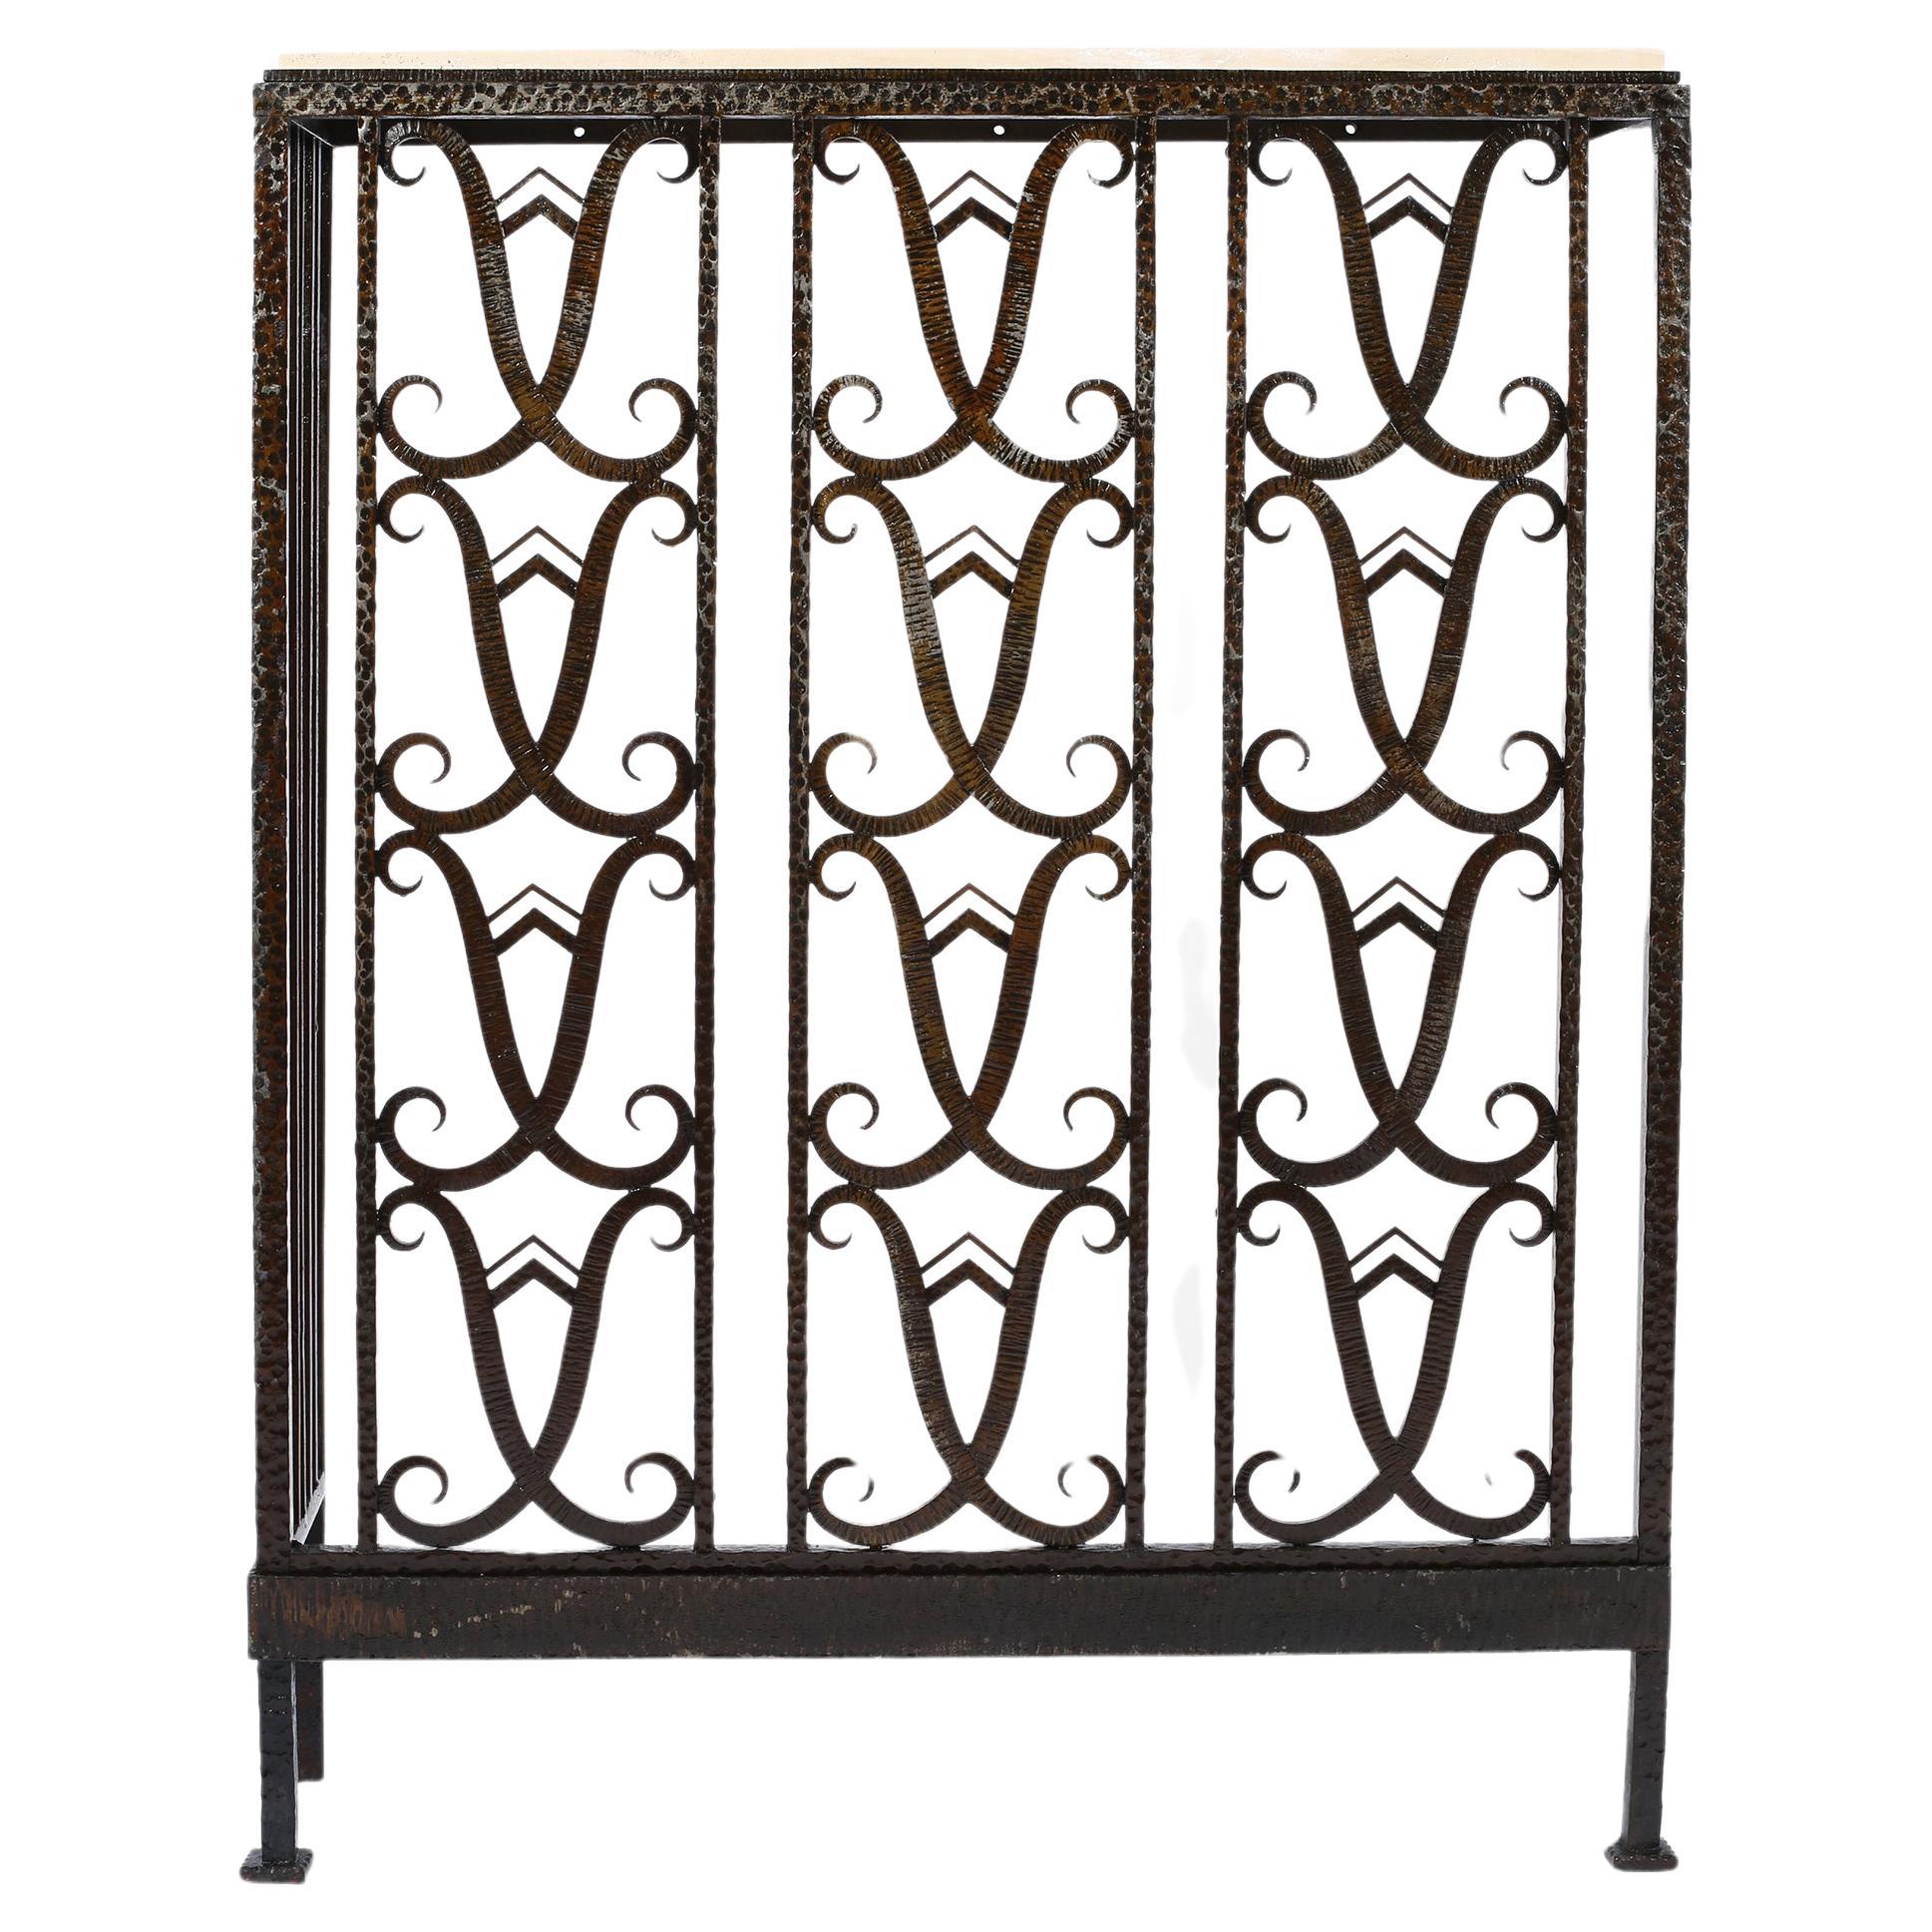 French Art Deco Forged Iron and Limestone Corner Console Table Radiator Cover